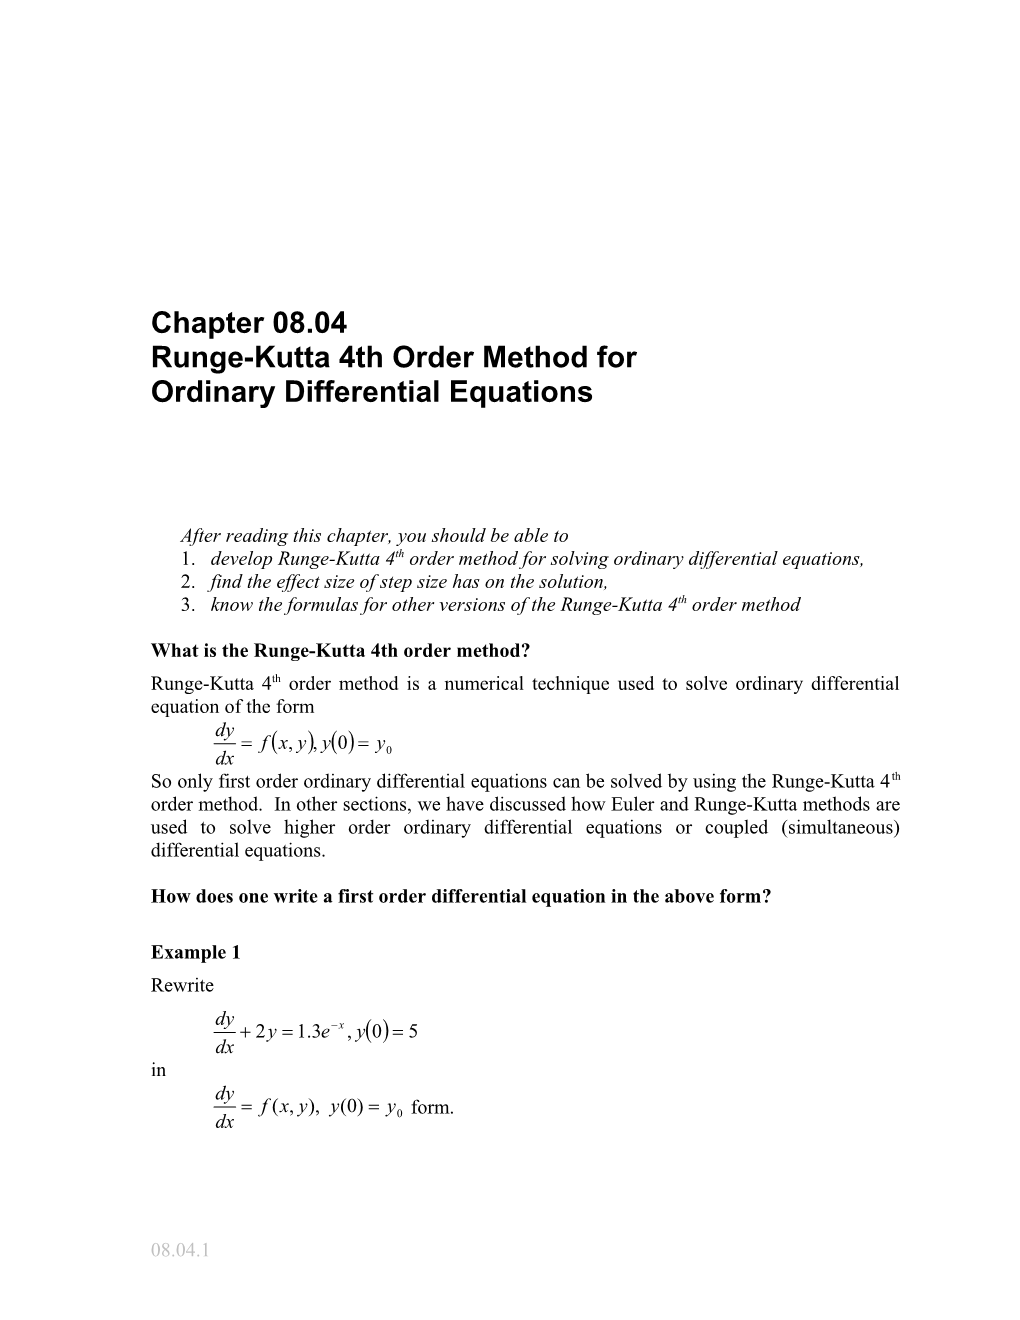 Runge-Kutta 4Th Order Method for Ordinary Differential Equations